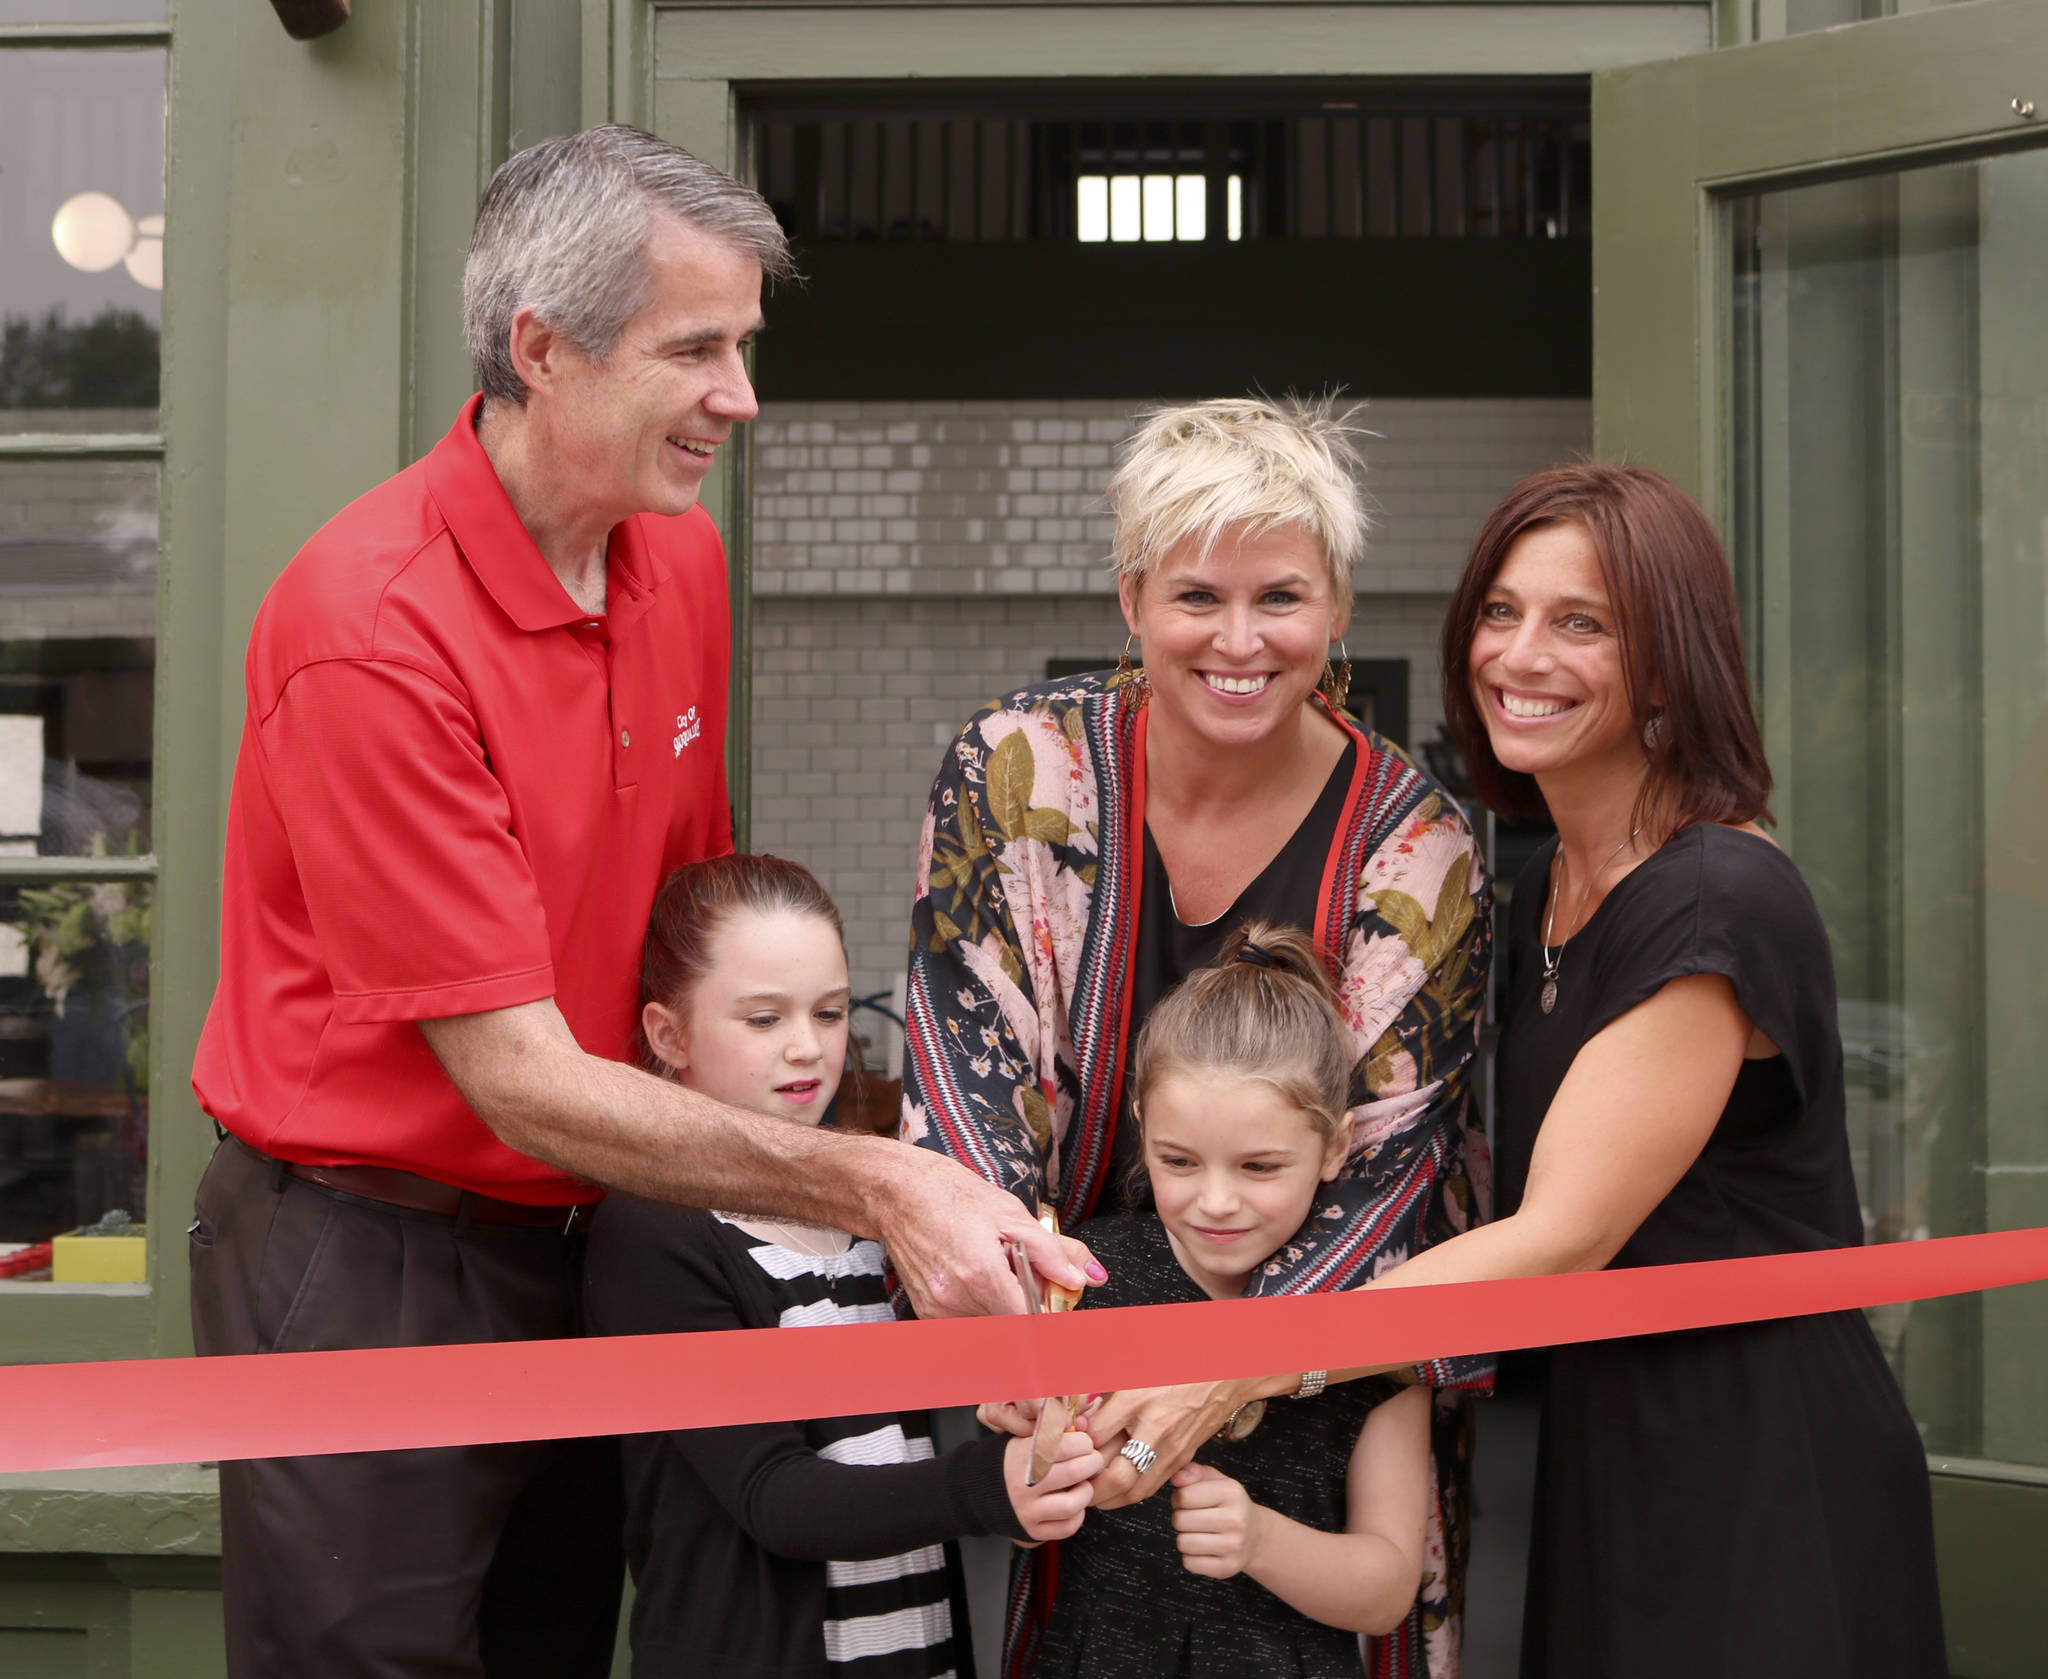 Evan Pappas/Staff Photo                                Heirloom Cookshop held its official ribbon cutting Sept. 5. From left, Snoqualmie Mayor Matt Larson, Ryanne Schumacher, Finely Schumacher, Kristen Schumacher, Snoqualmie Valley Chamber of Commerce Member Services Manager Monica Lynne.